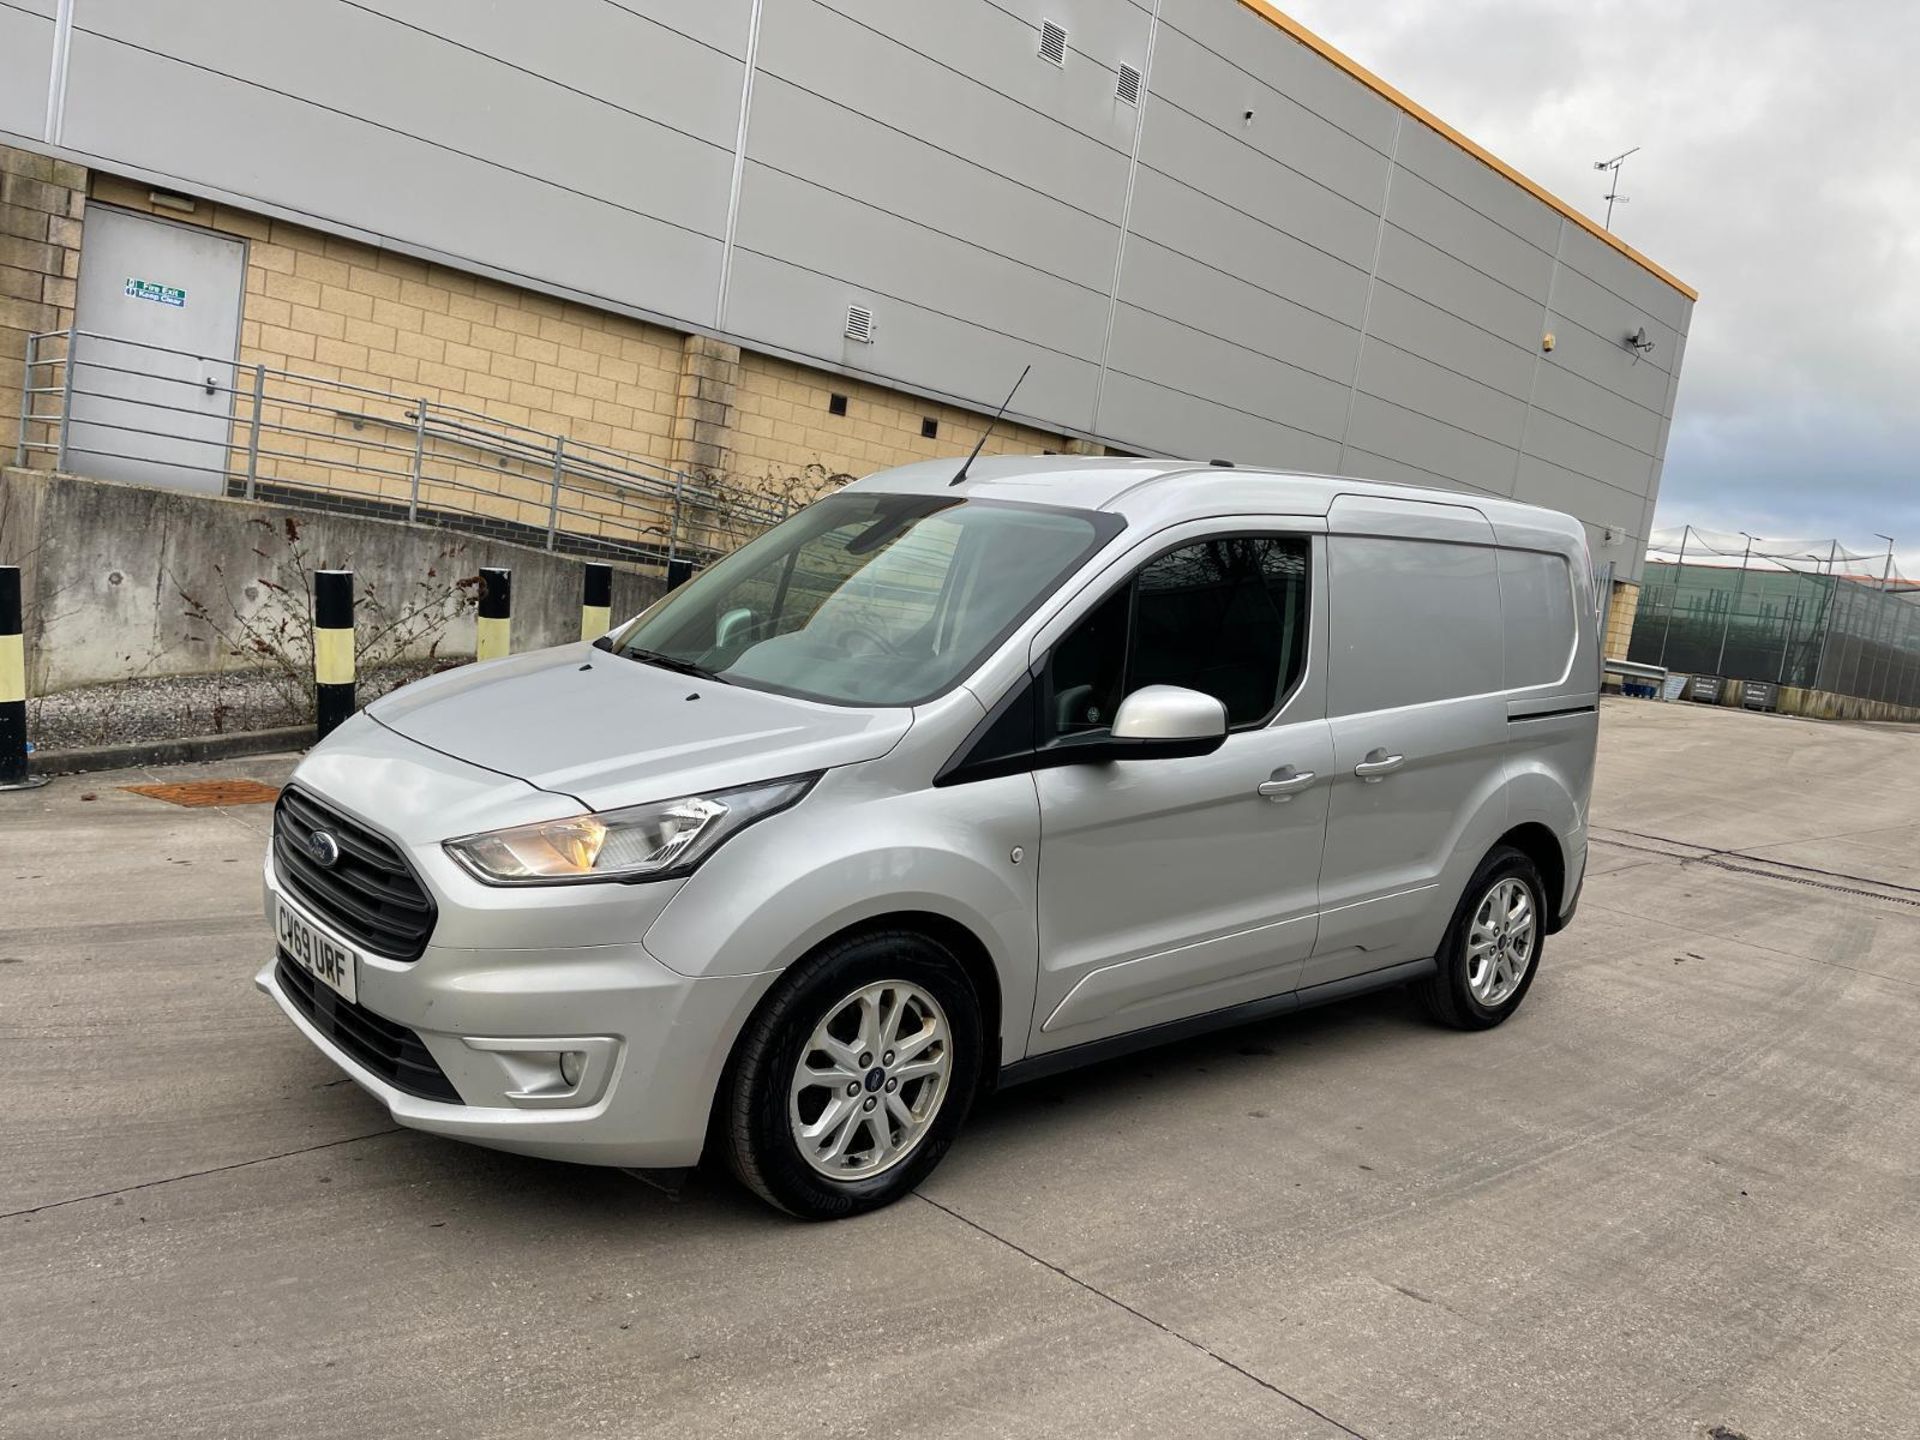 2019 FORD TRANSIT CONNECT LIMITED: POWERFUL 1.5 TDCI DIESEL - Image 4 of 12